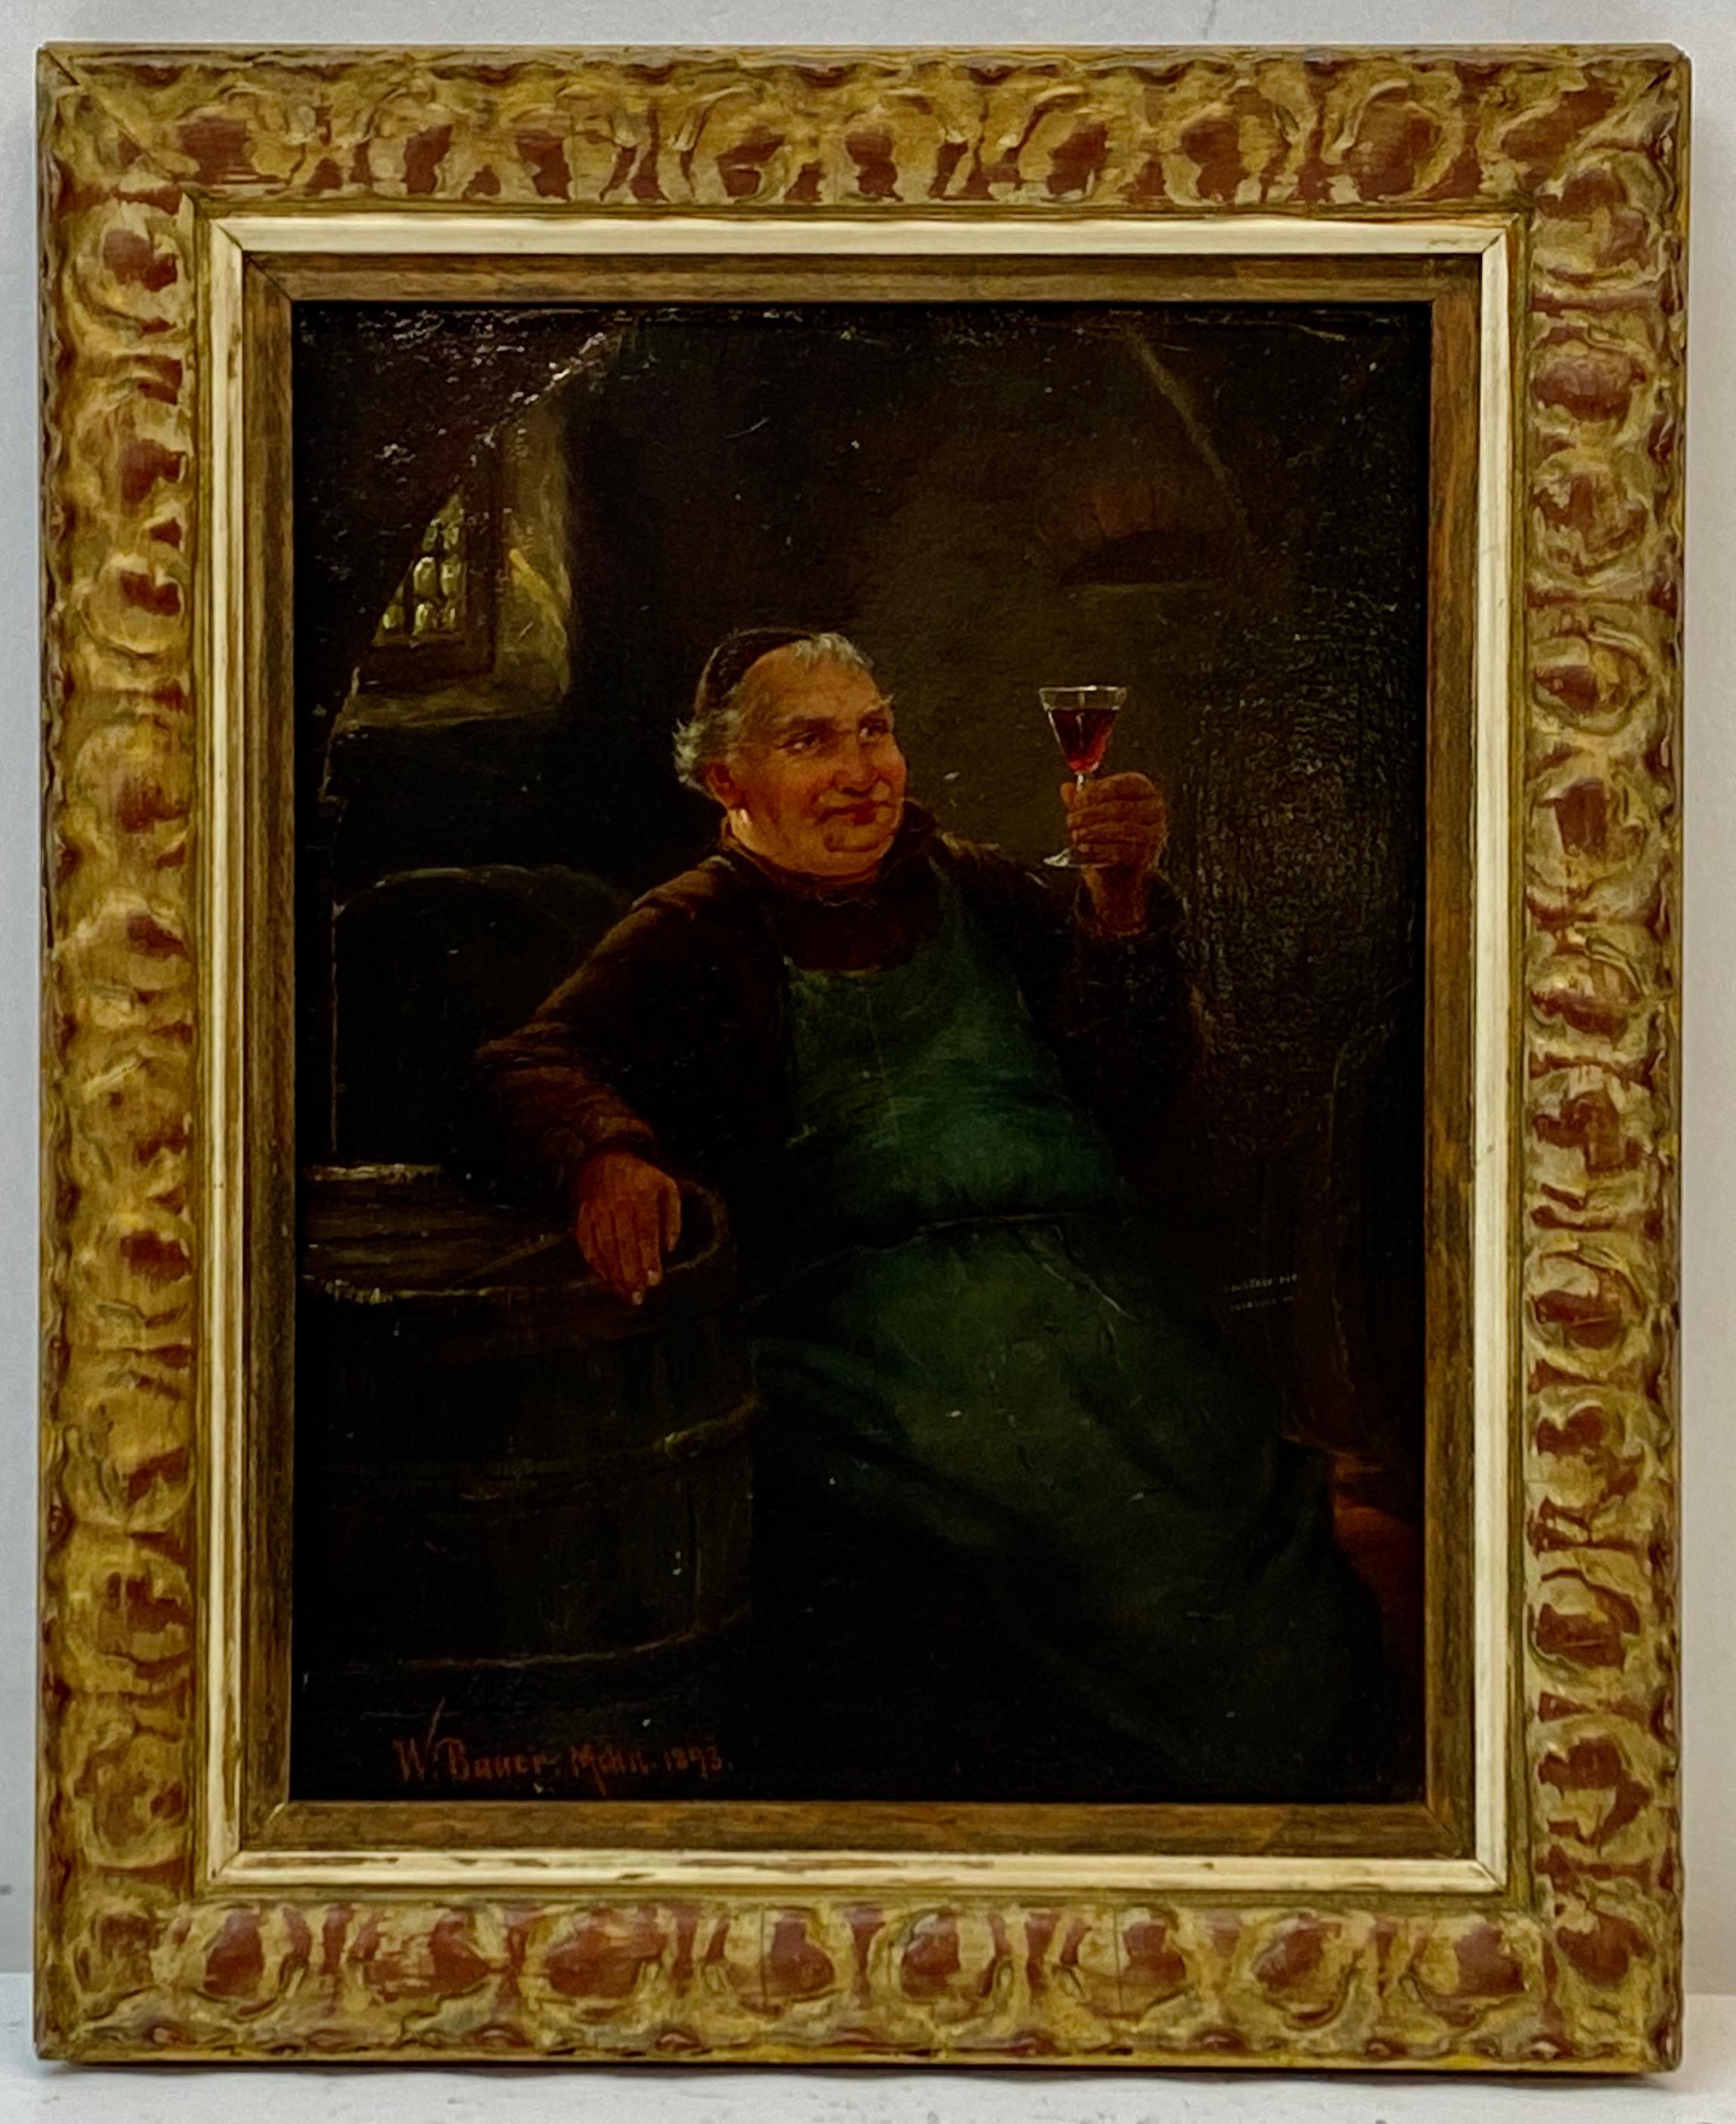 Unknown Portrait Painting - 19th Century Monk Wine Tasting Oil Painting by W. Bauer C.1893